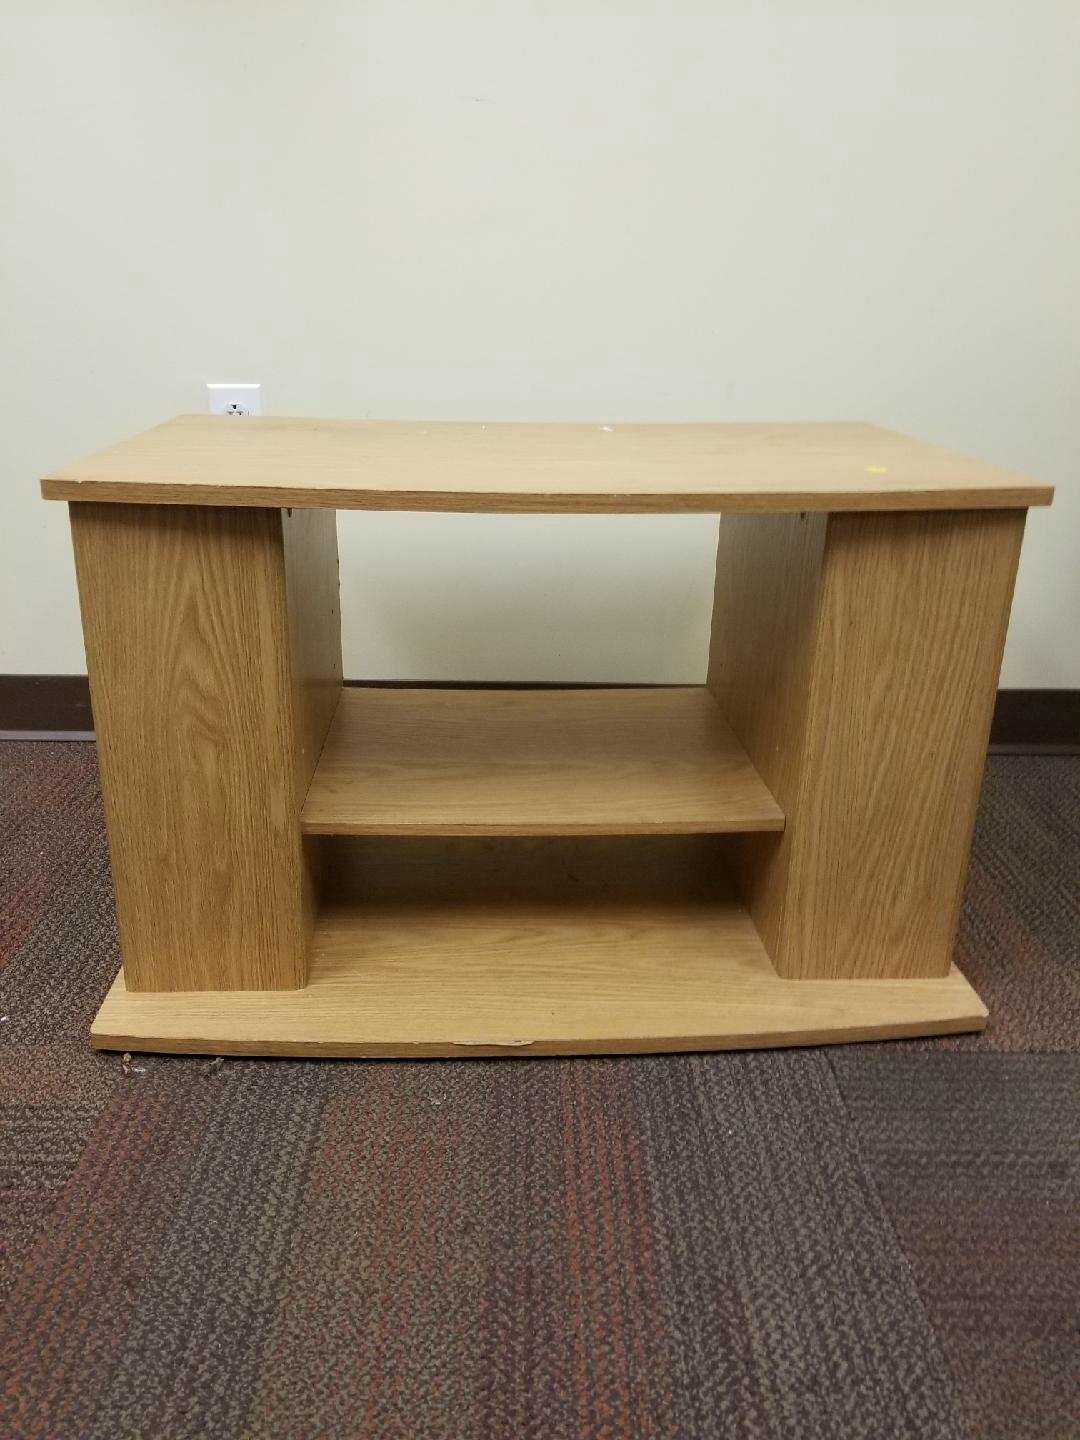 TV stand in Birch color